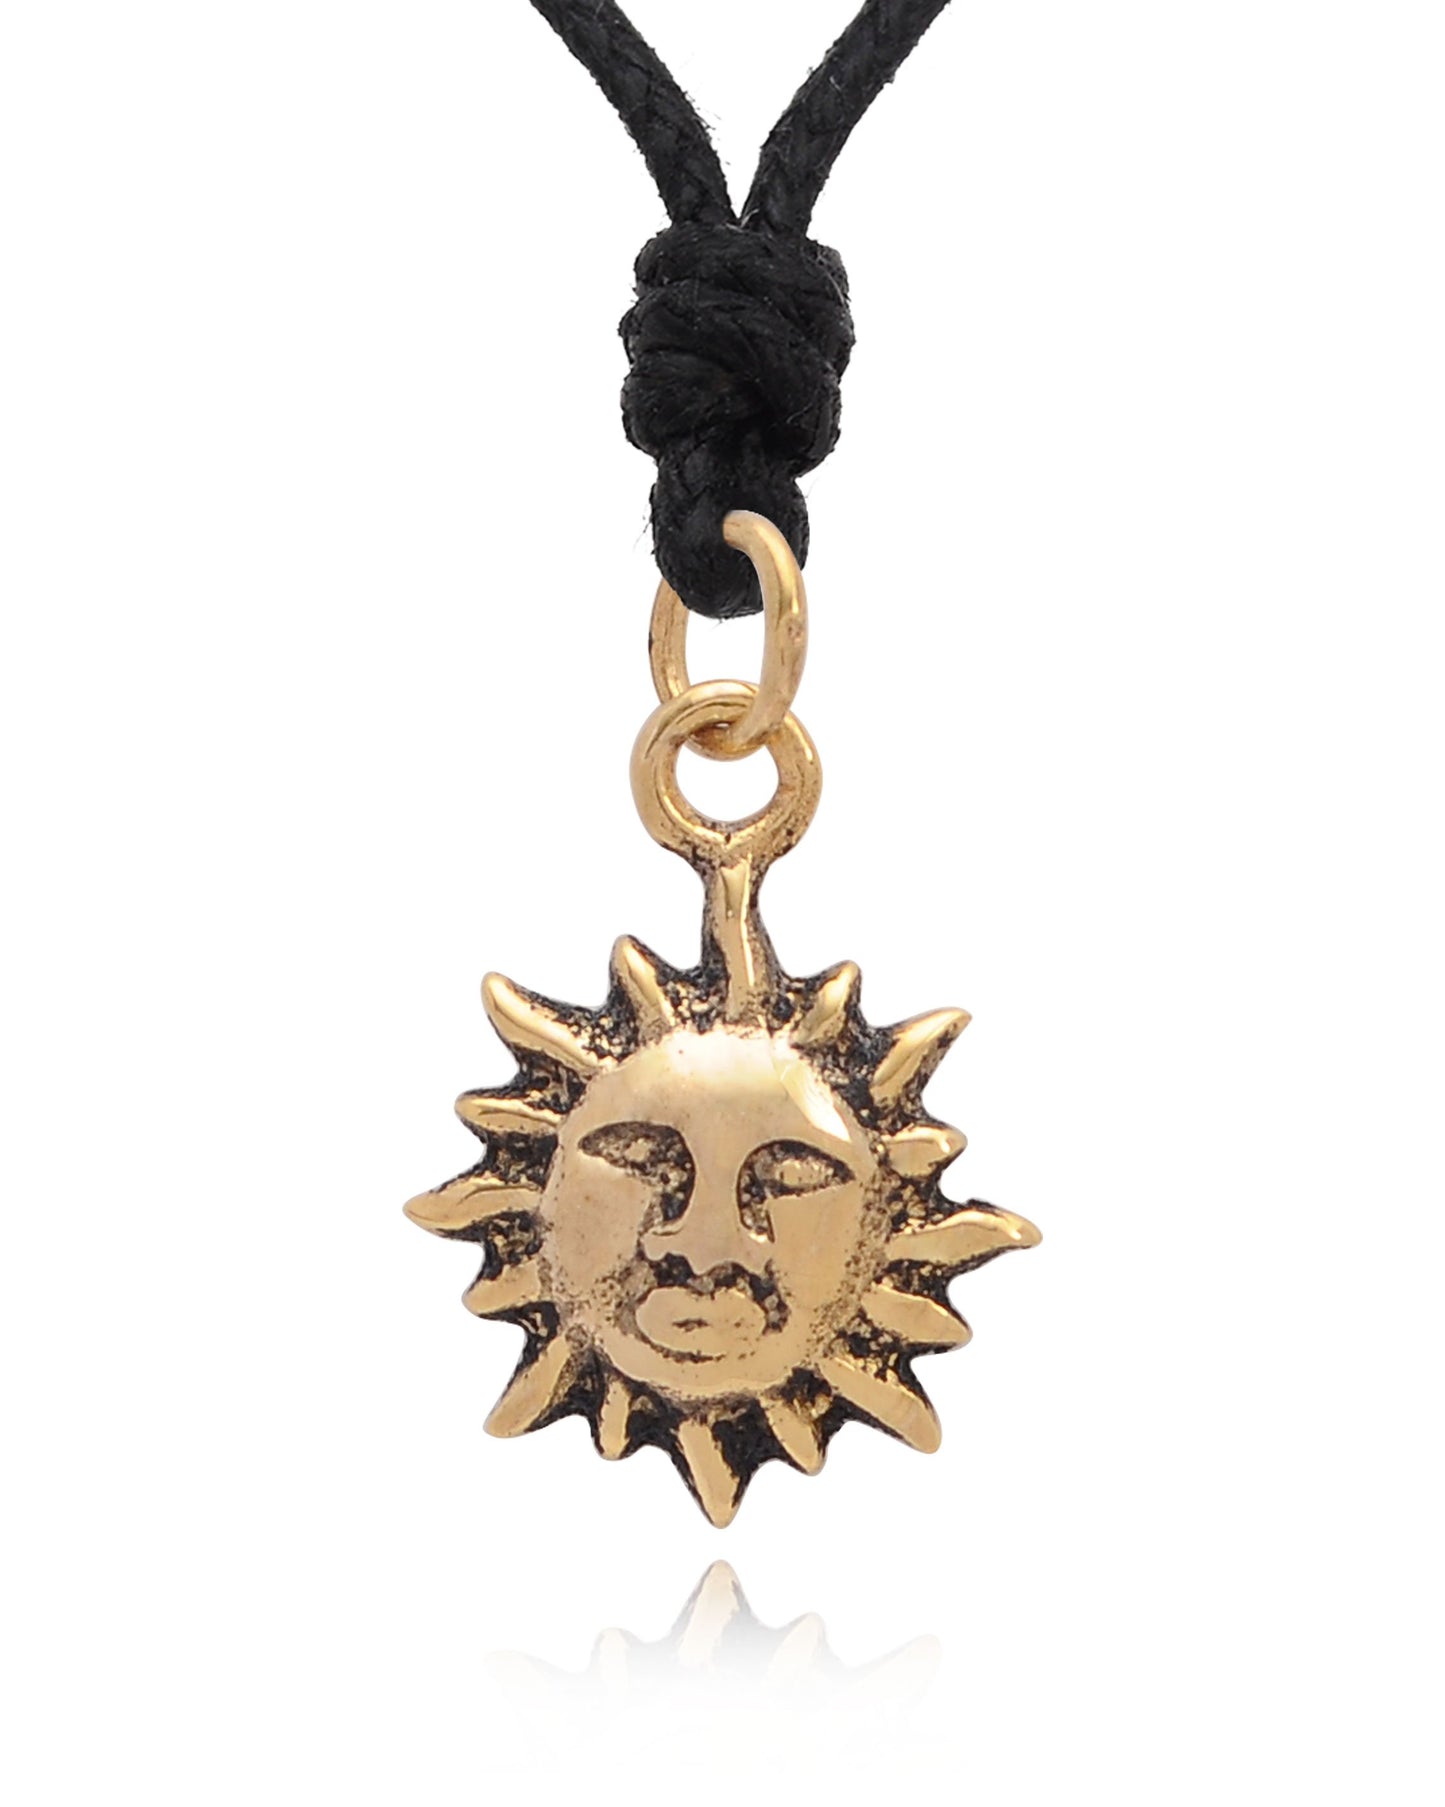 Sun 92.5 Sterling Silver Charm Necklace Pendant Jewelry